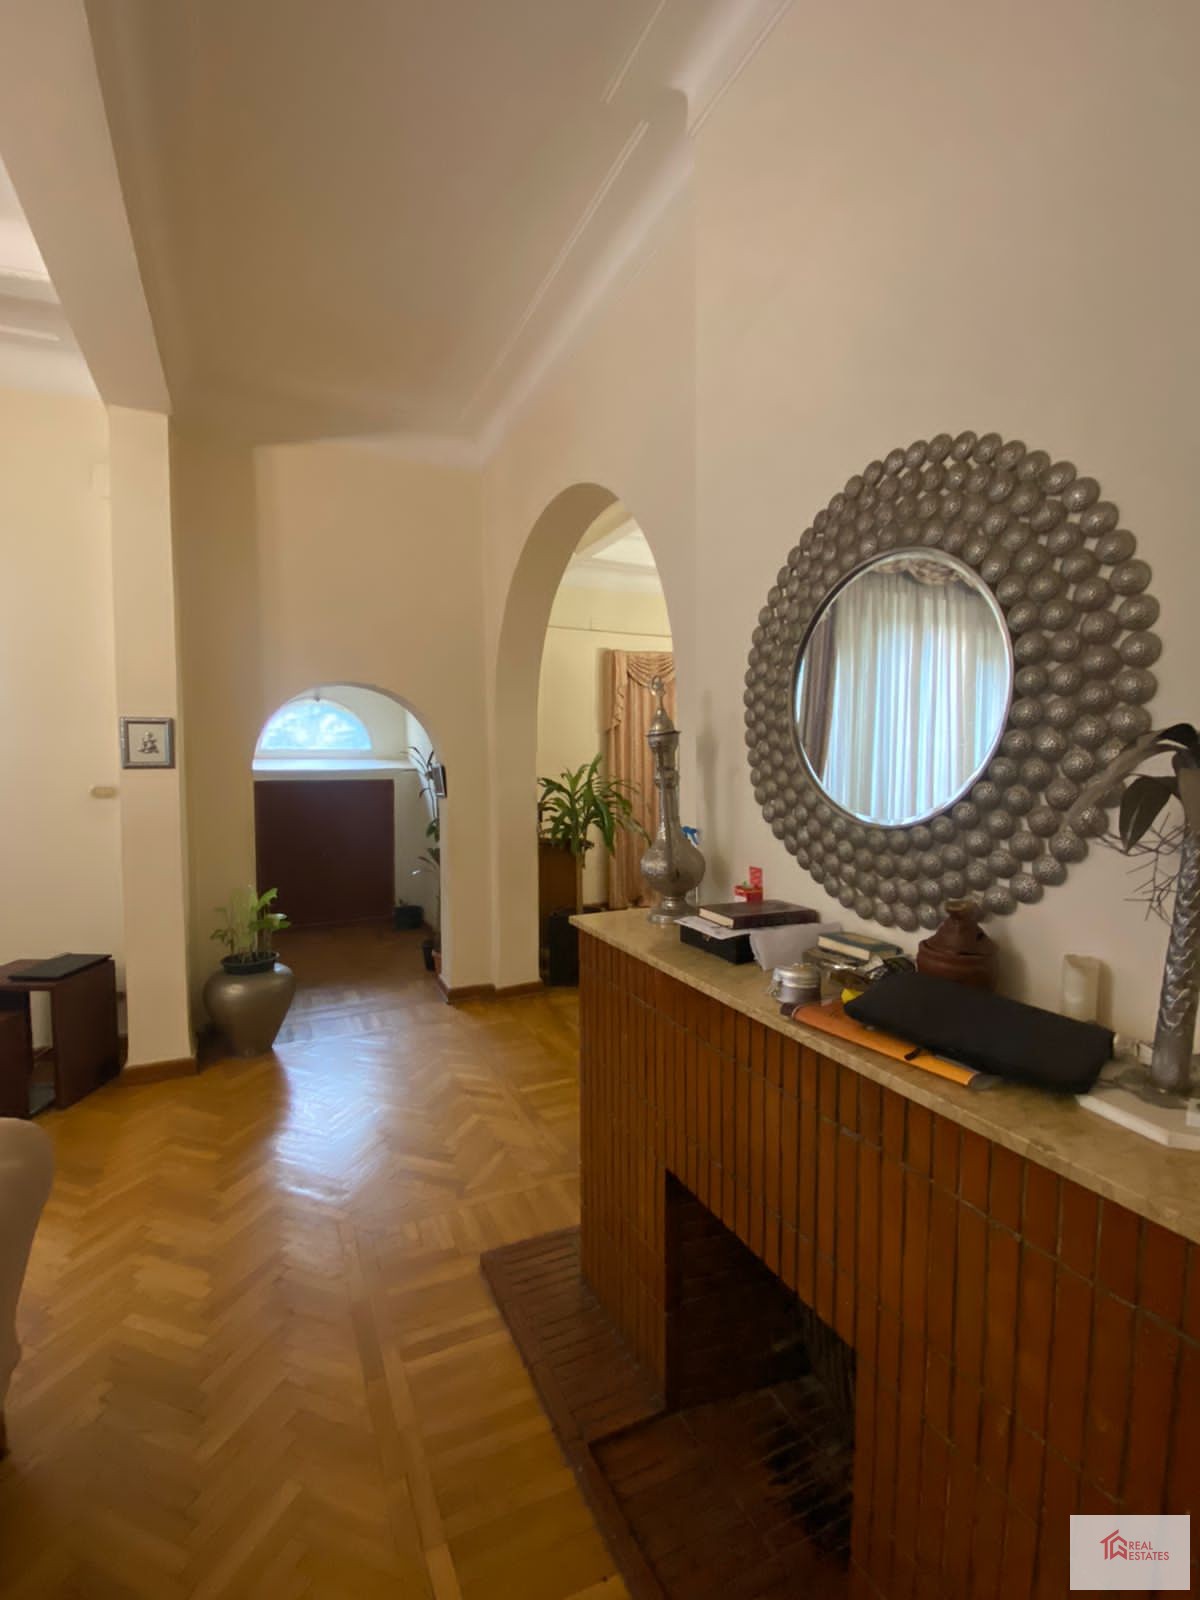 Apartment ground floor 350 m² with garden and separate enterance